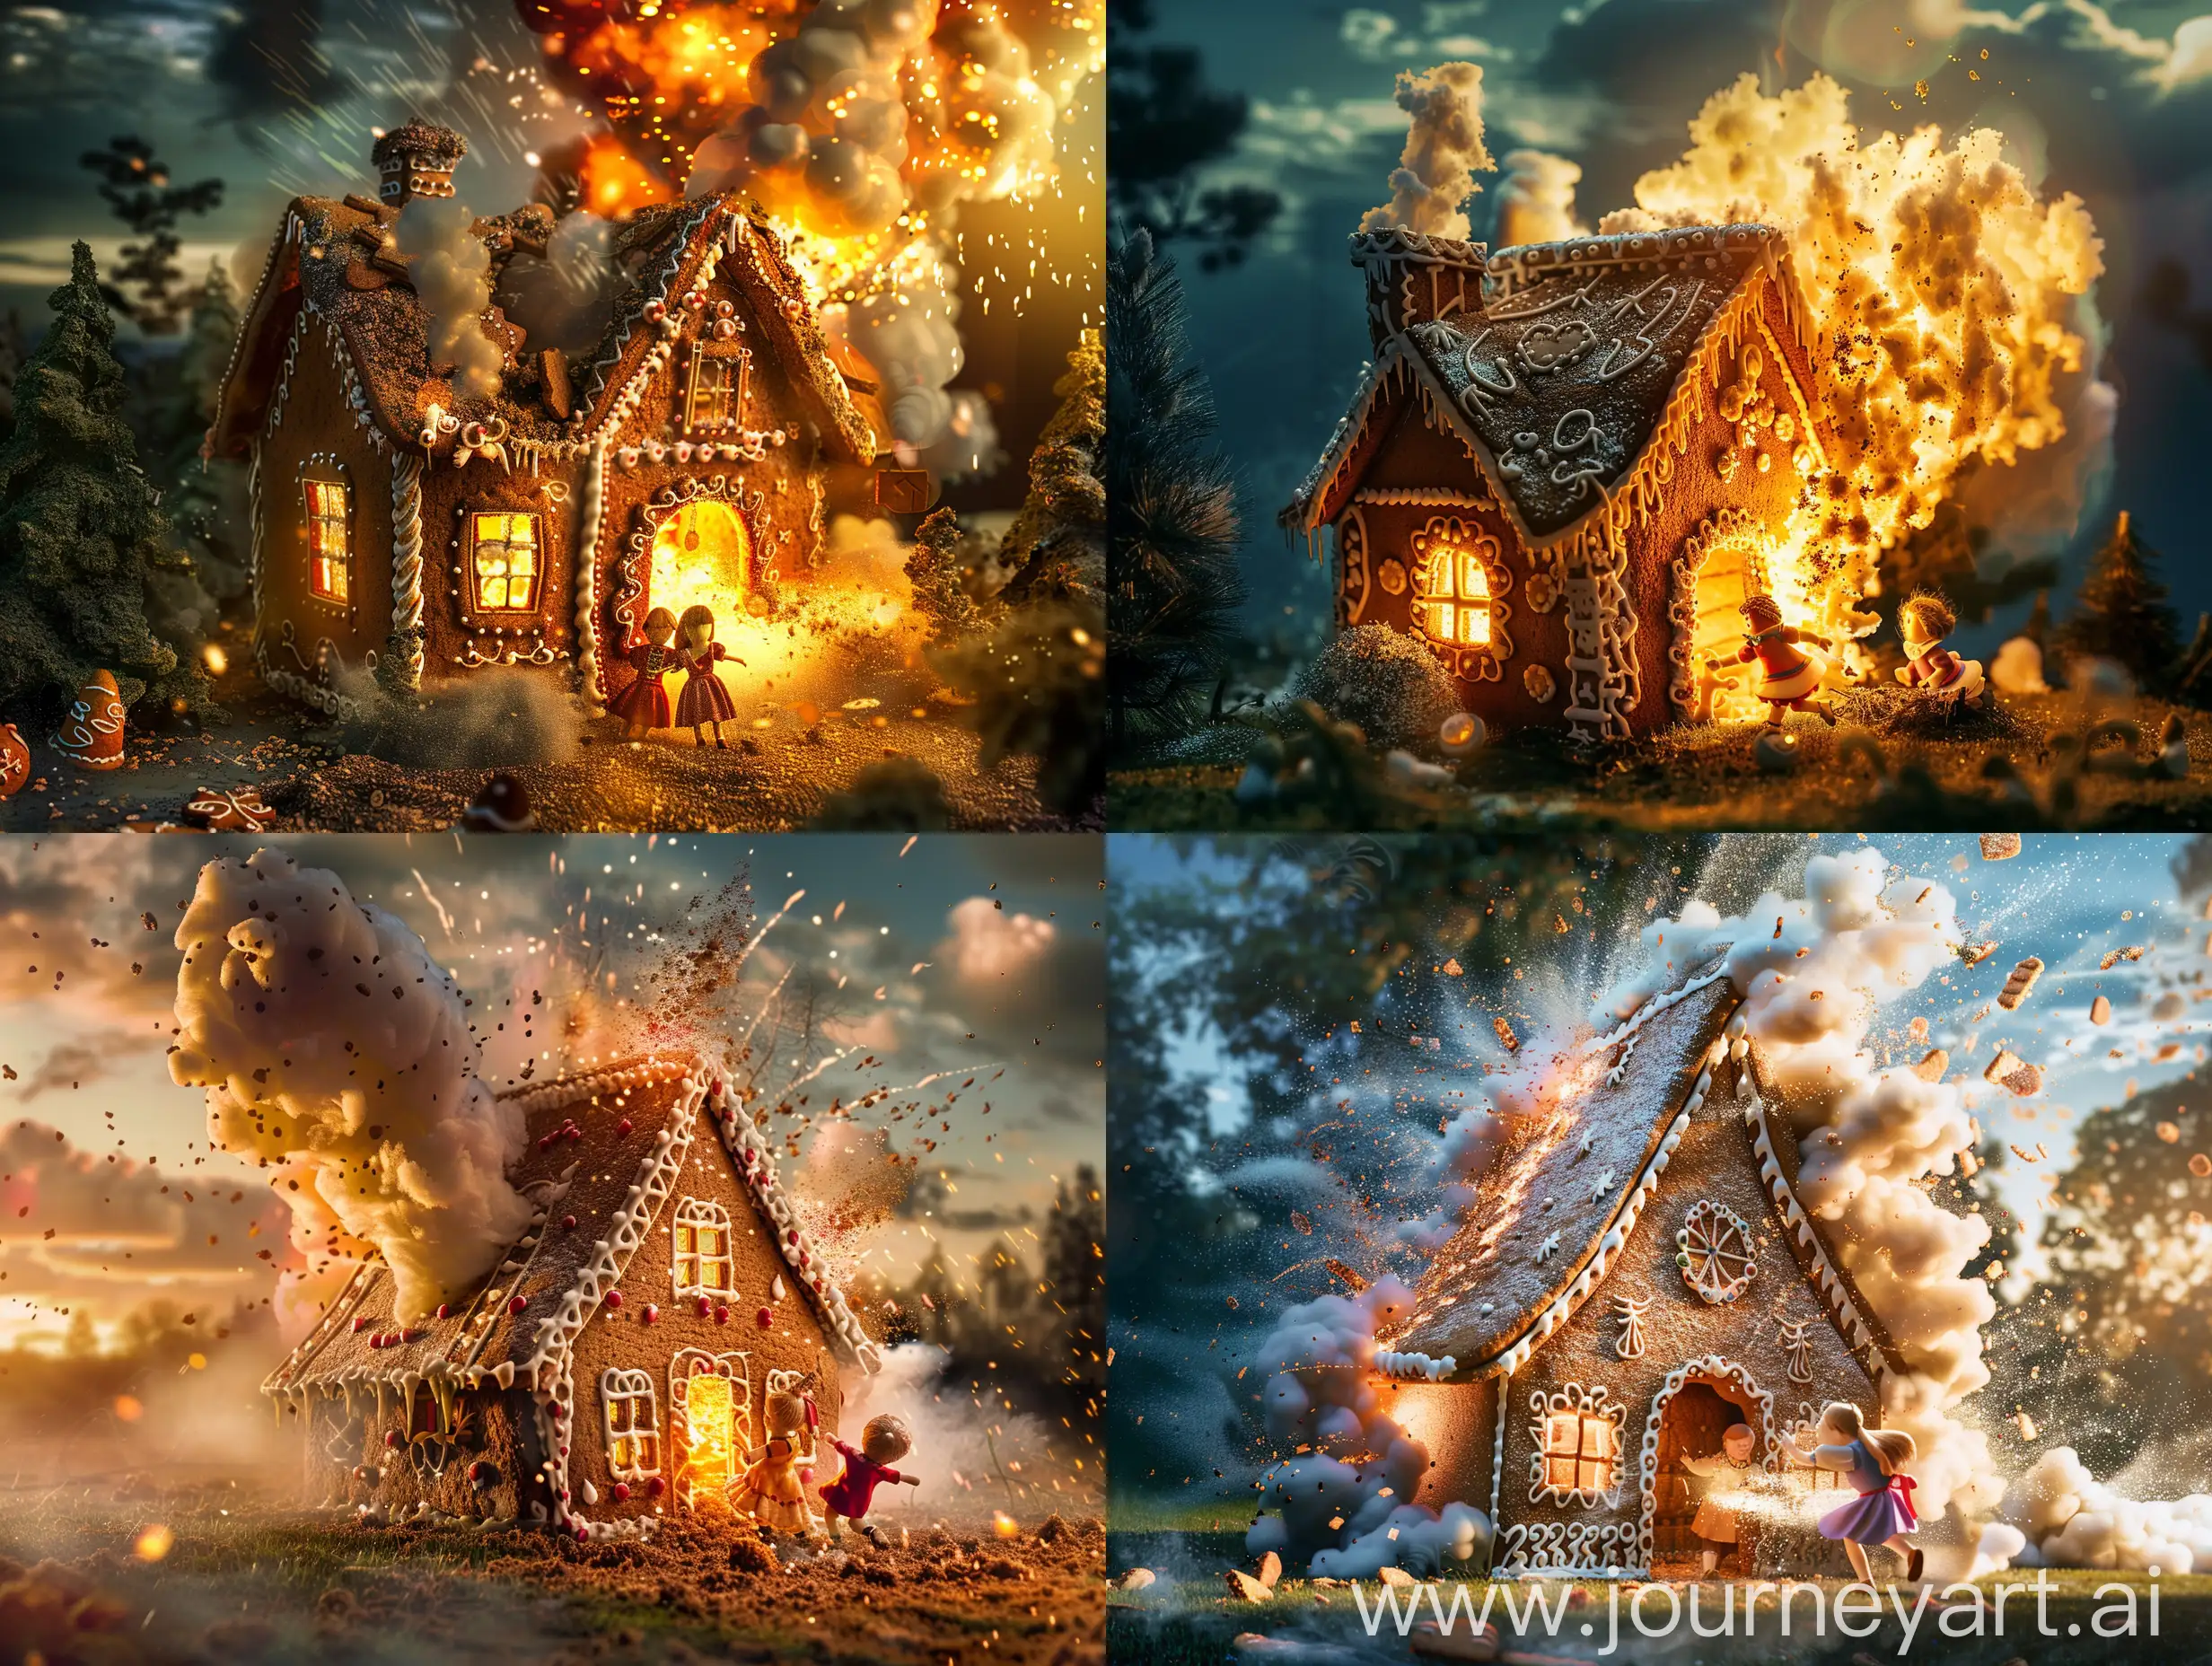 An old gingerbread house is blown up and a boy and a girl (Hansel and Gretel) come out of it, high quality, classic lighting, very realistic, in the evening, the image is very clear,